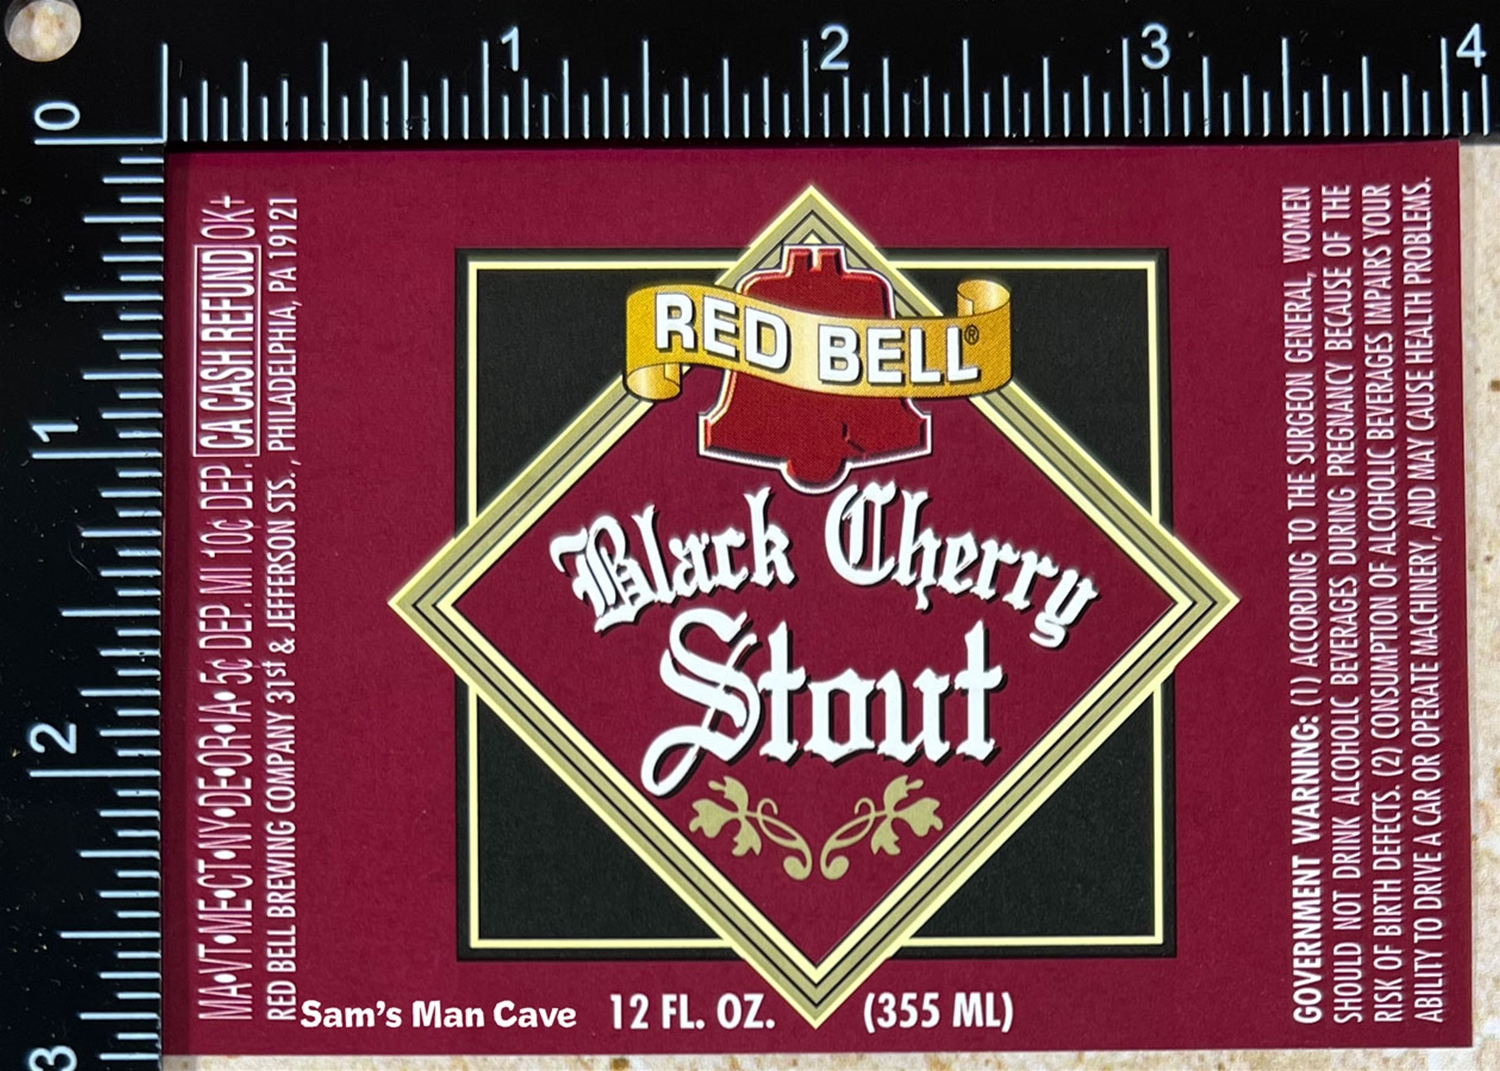 Bell Black Cherry Stout Beer Label